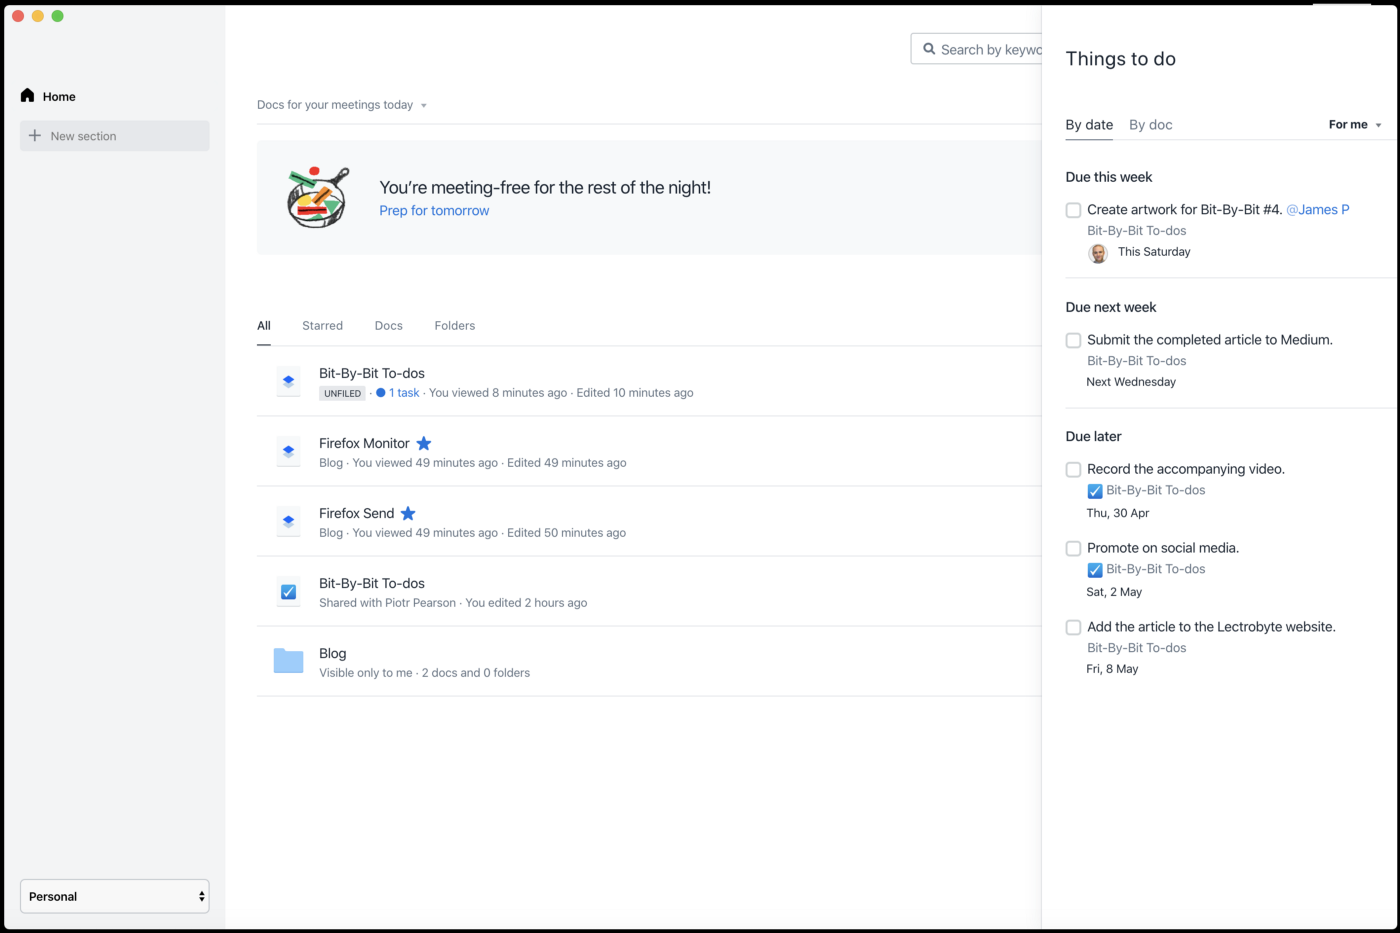 The Things to do panel opened on the Dropbox Paper desktop app.